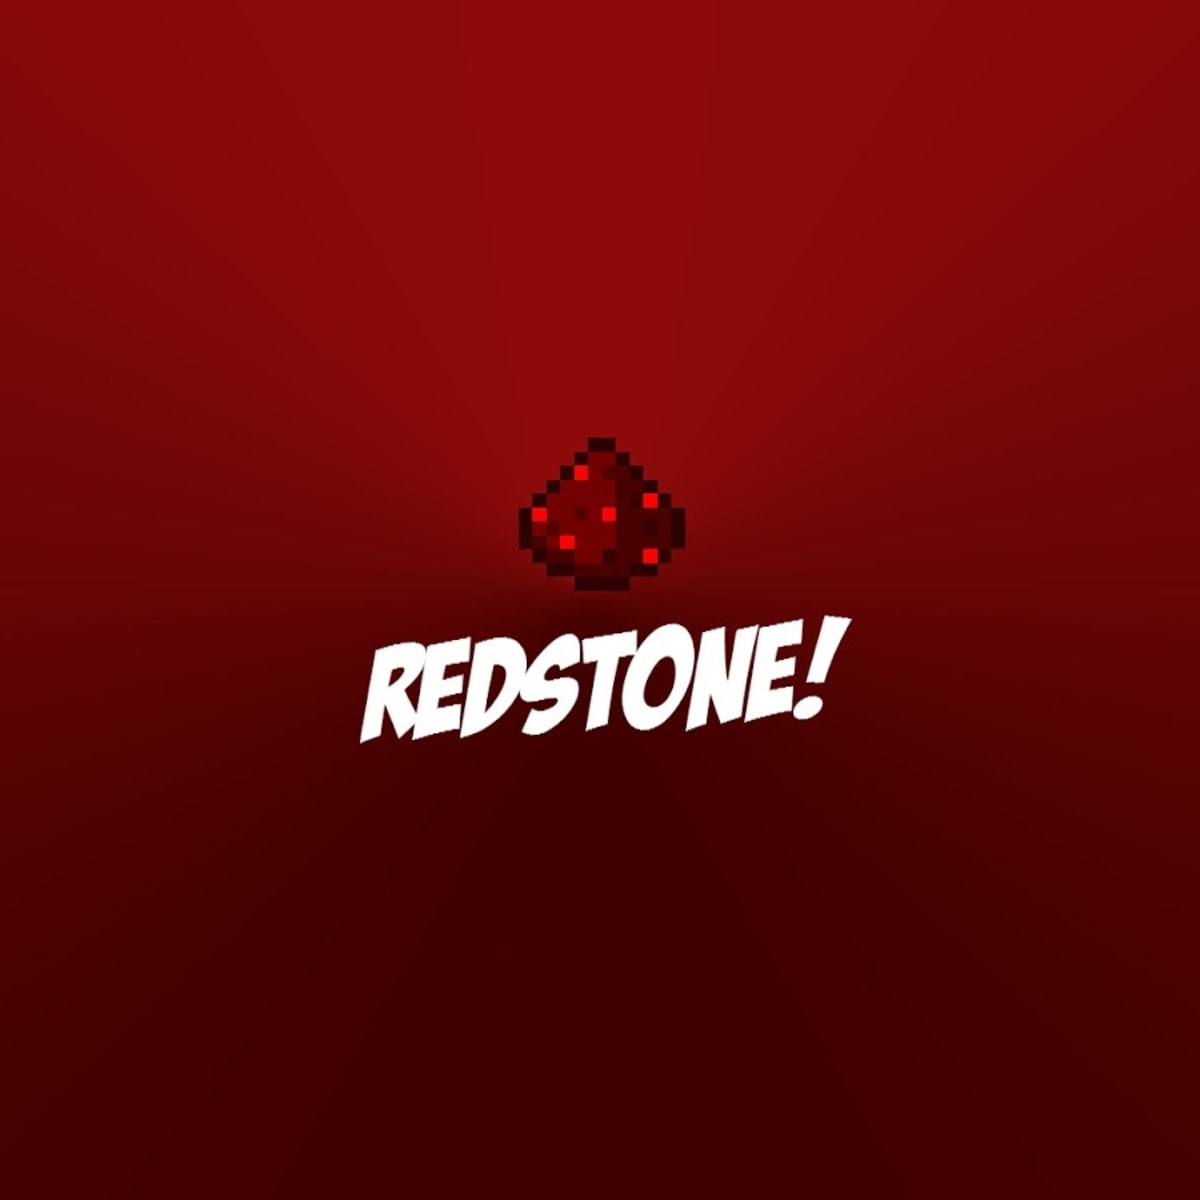 Minecraft Redstone Tutorial What Is Redstone Used For Levelskip Video Games